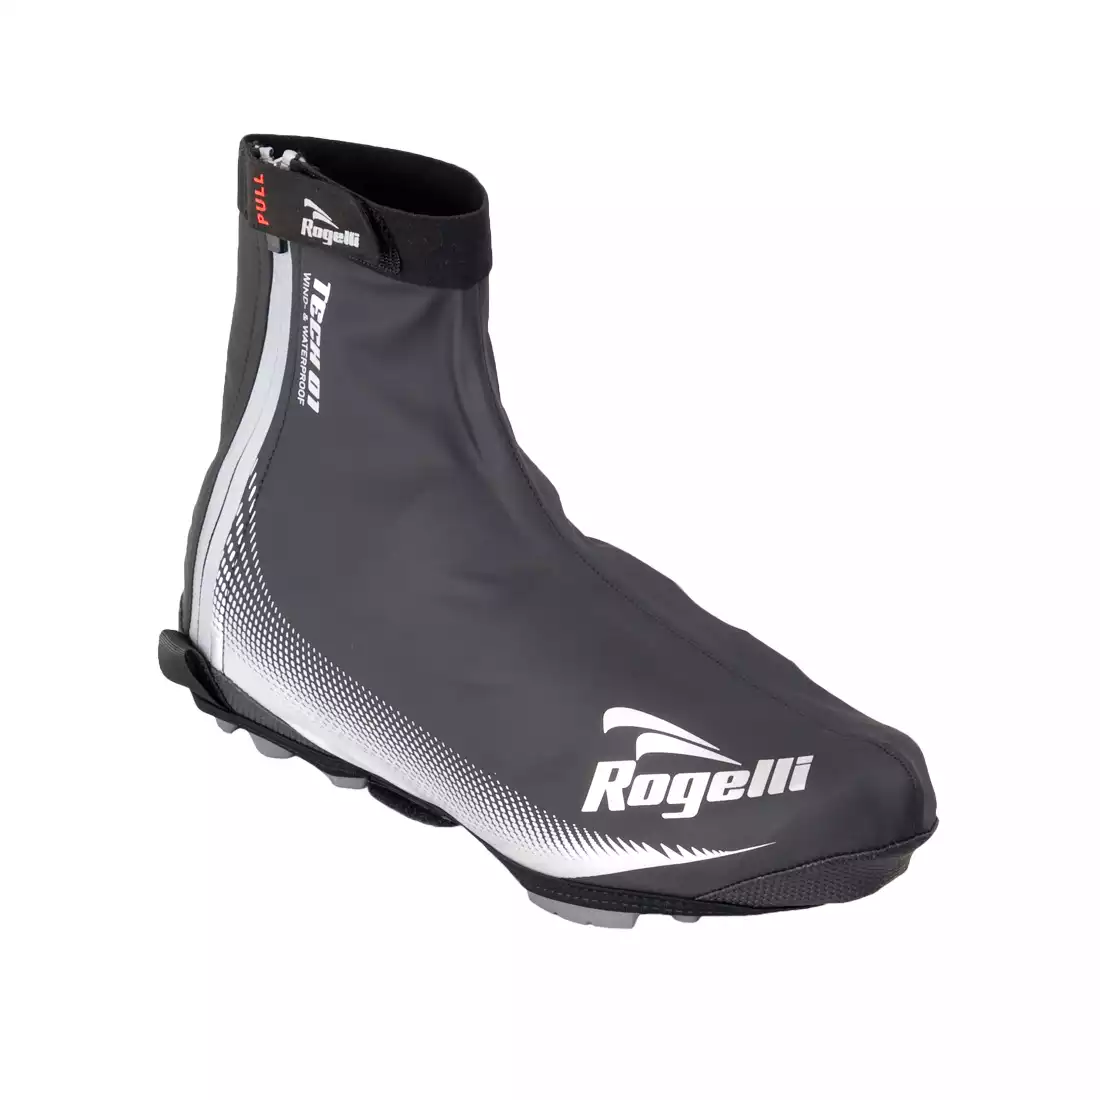 ROGELLI FIANDREX - Covers for cycling shoes, color: Black and silver